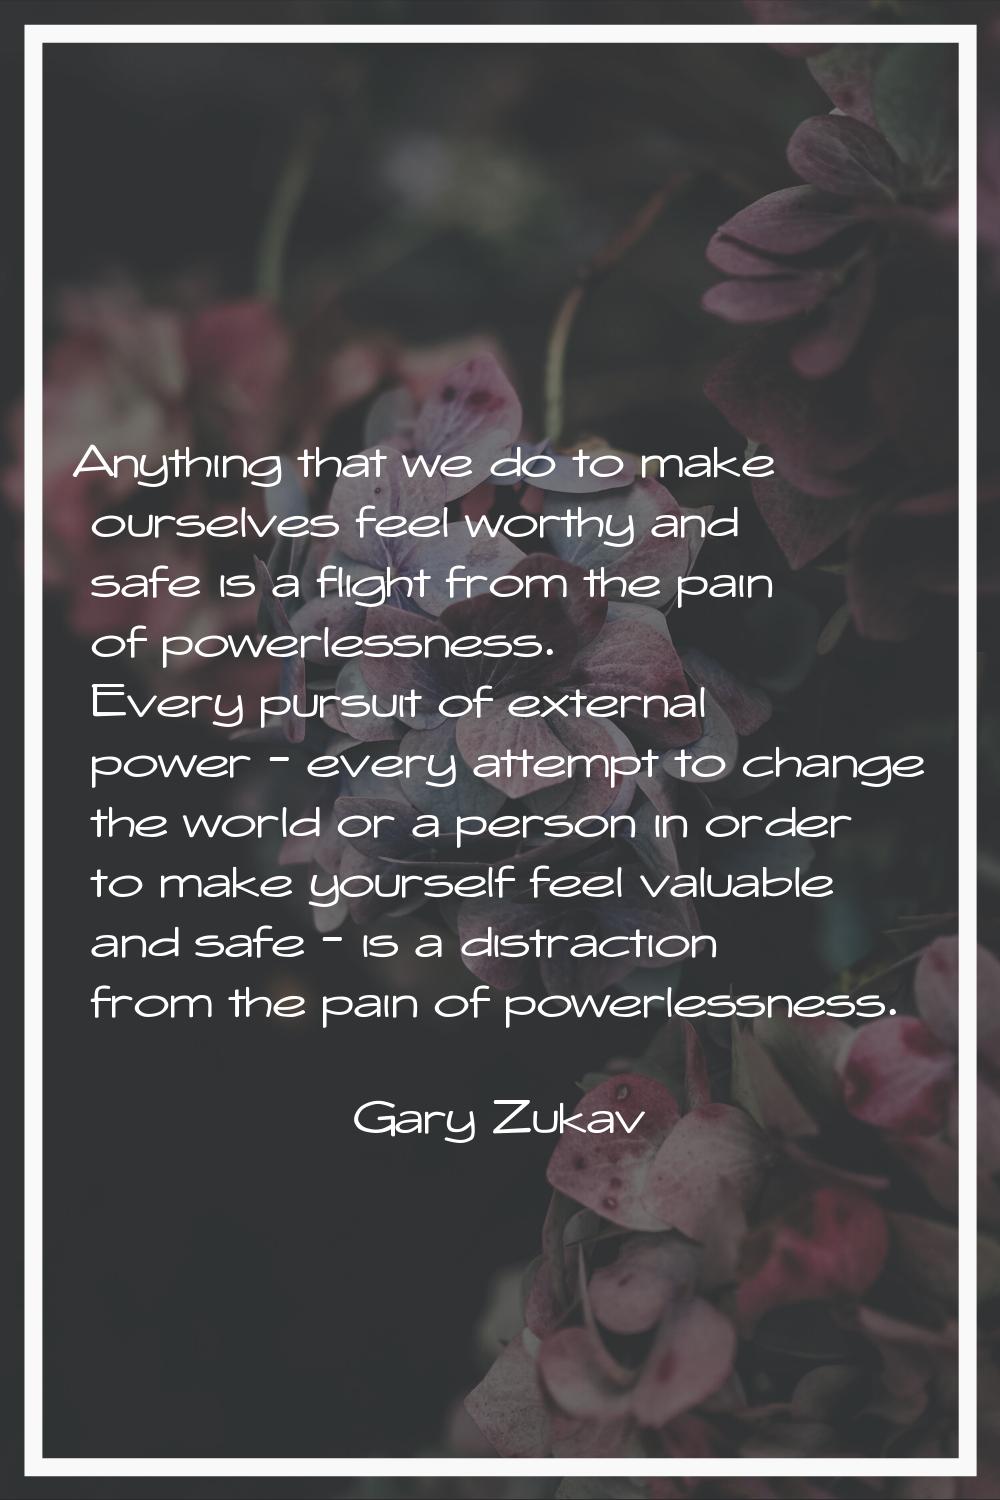 Anything that we do to make ourselves feel worthy and safe is a flight from the pain of powerlessne